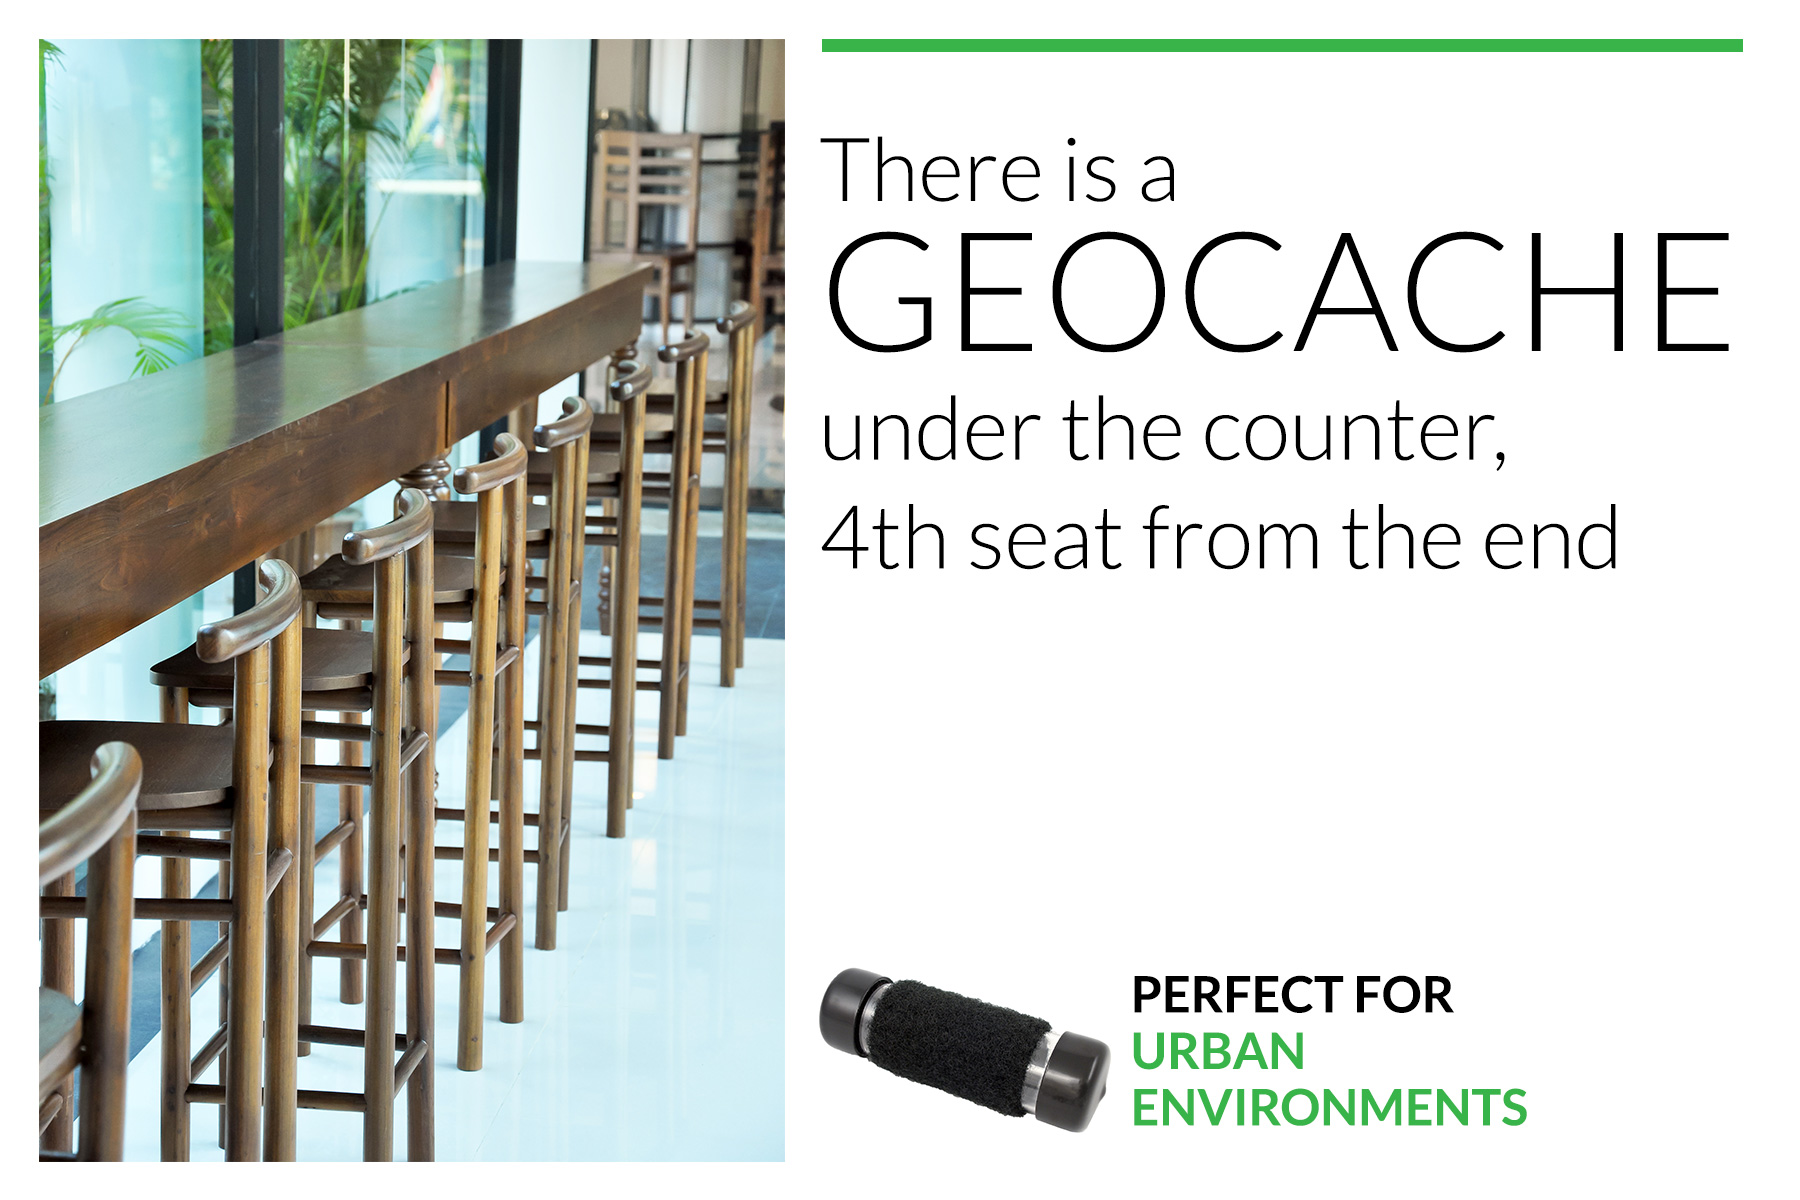 Geocache for the city - Perfect for urban environments